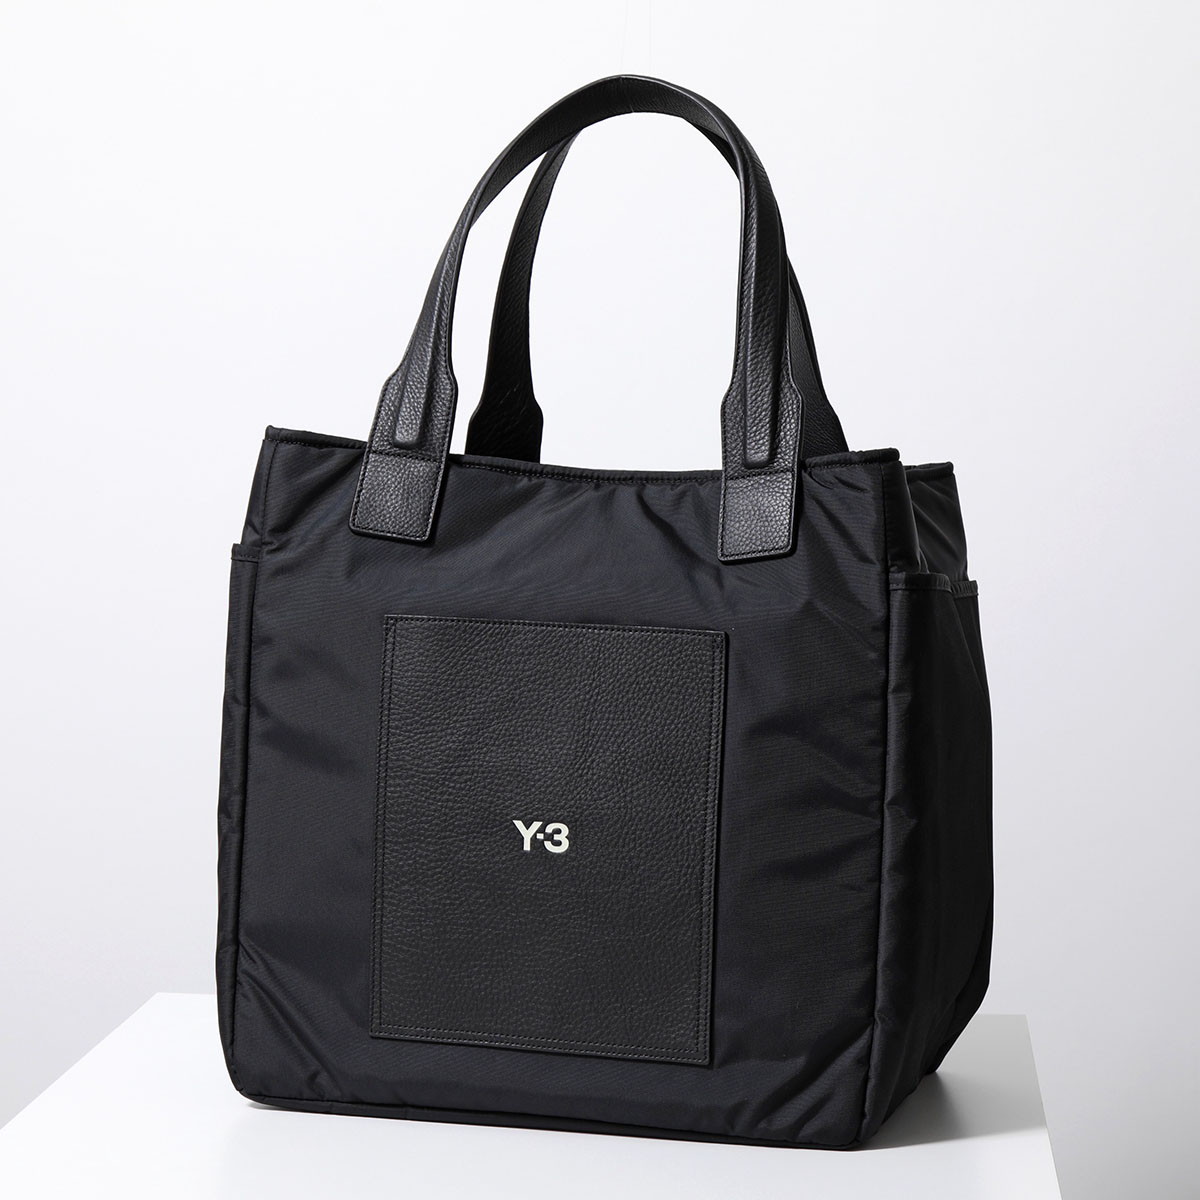 Y-3 ワイスリー トートバッグ LUX BAG IY0098 IY0099 メンズ ナイロン×レザー ロゴ ショッピングバッグ 鞄 カラー2色｜s-musee｜02